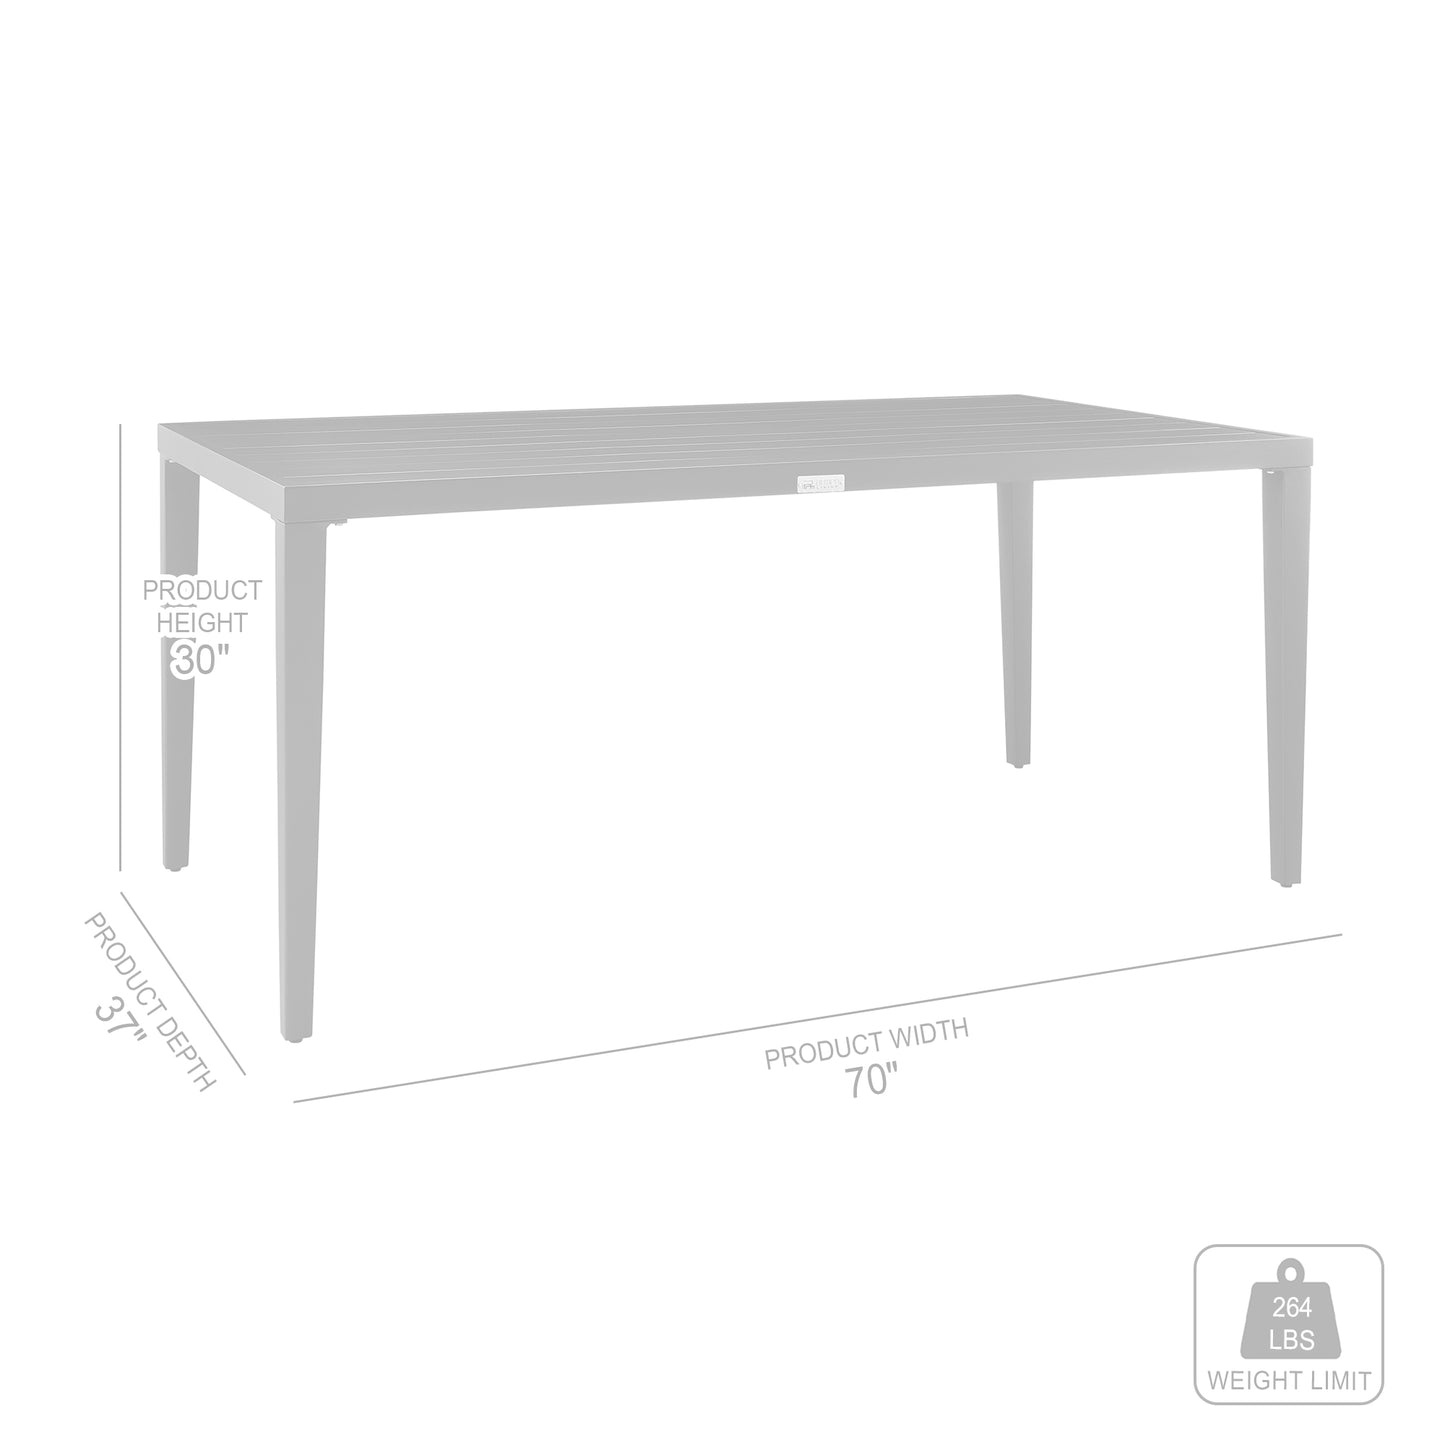 Palma Outdoor Patio Dining Table in Aluminum